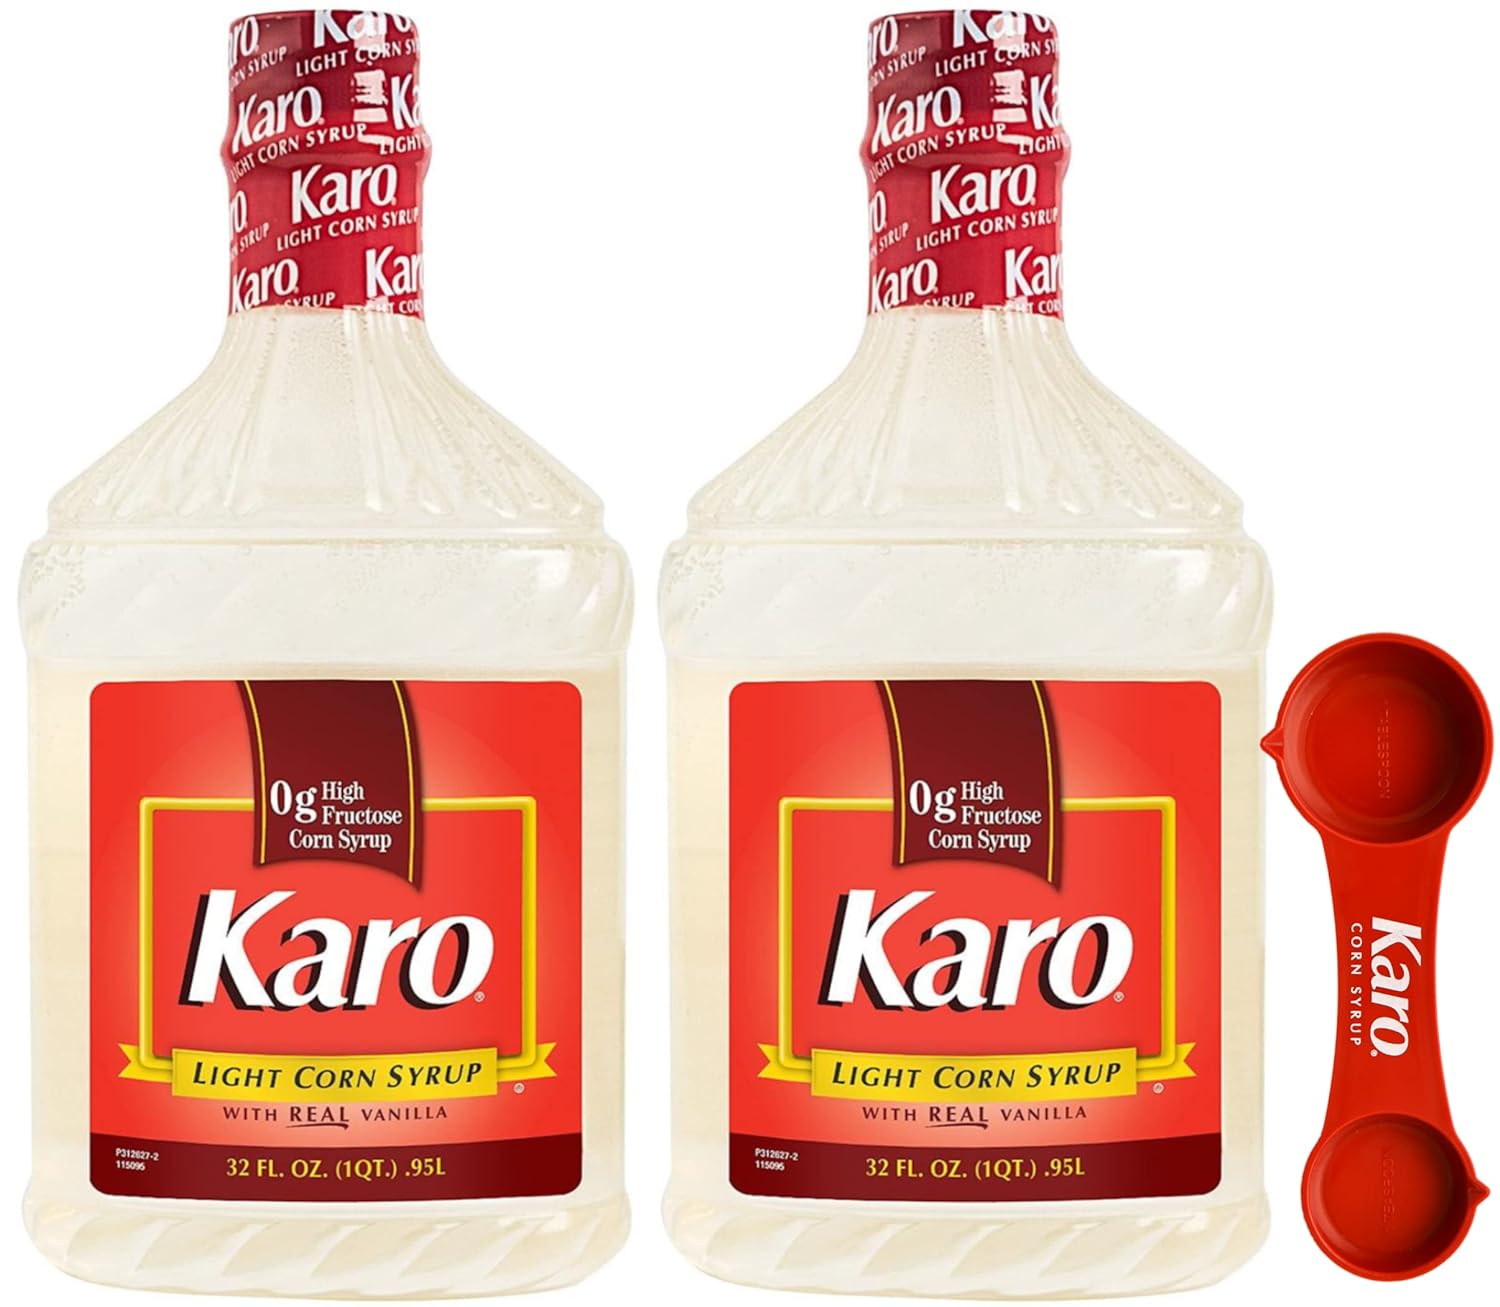 Karo Light Corn Syrup with Real Vanilla, 32 Ounce Bottle (Pack of 2) Includes Karo Measuring Spoon